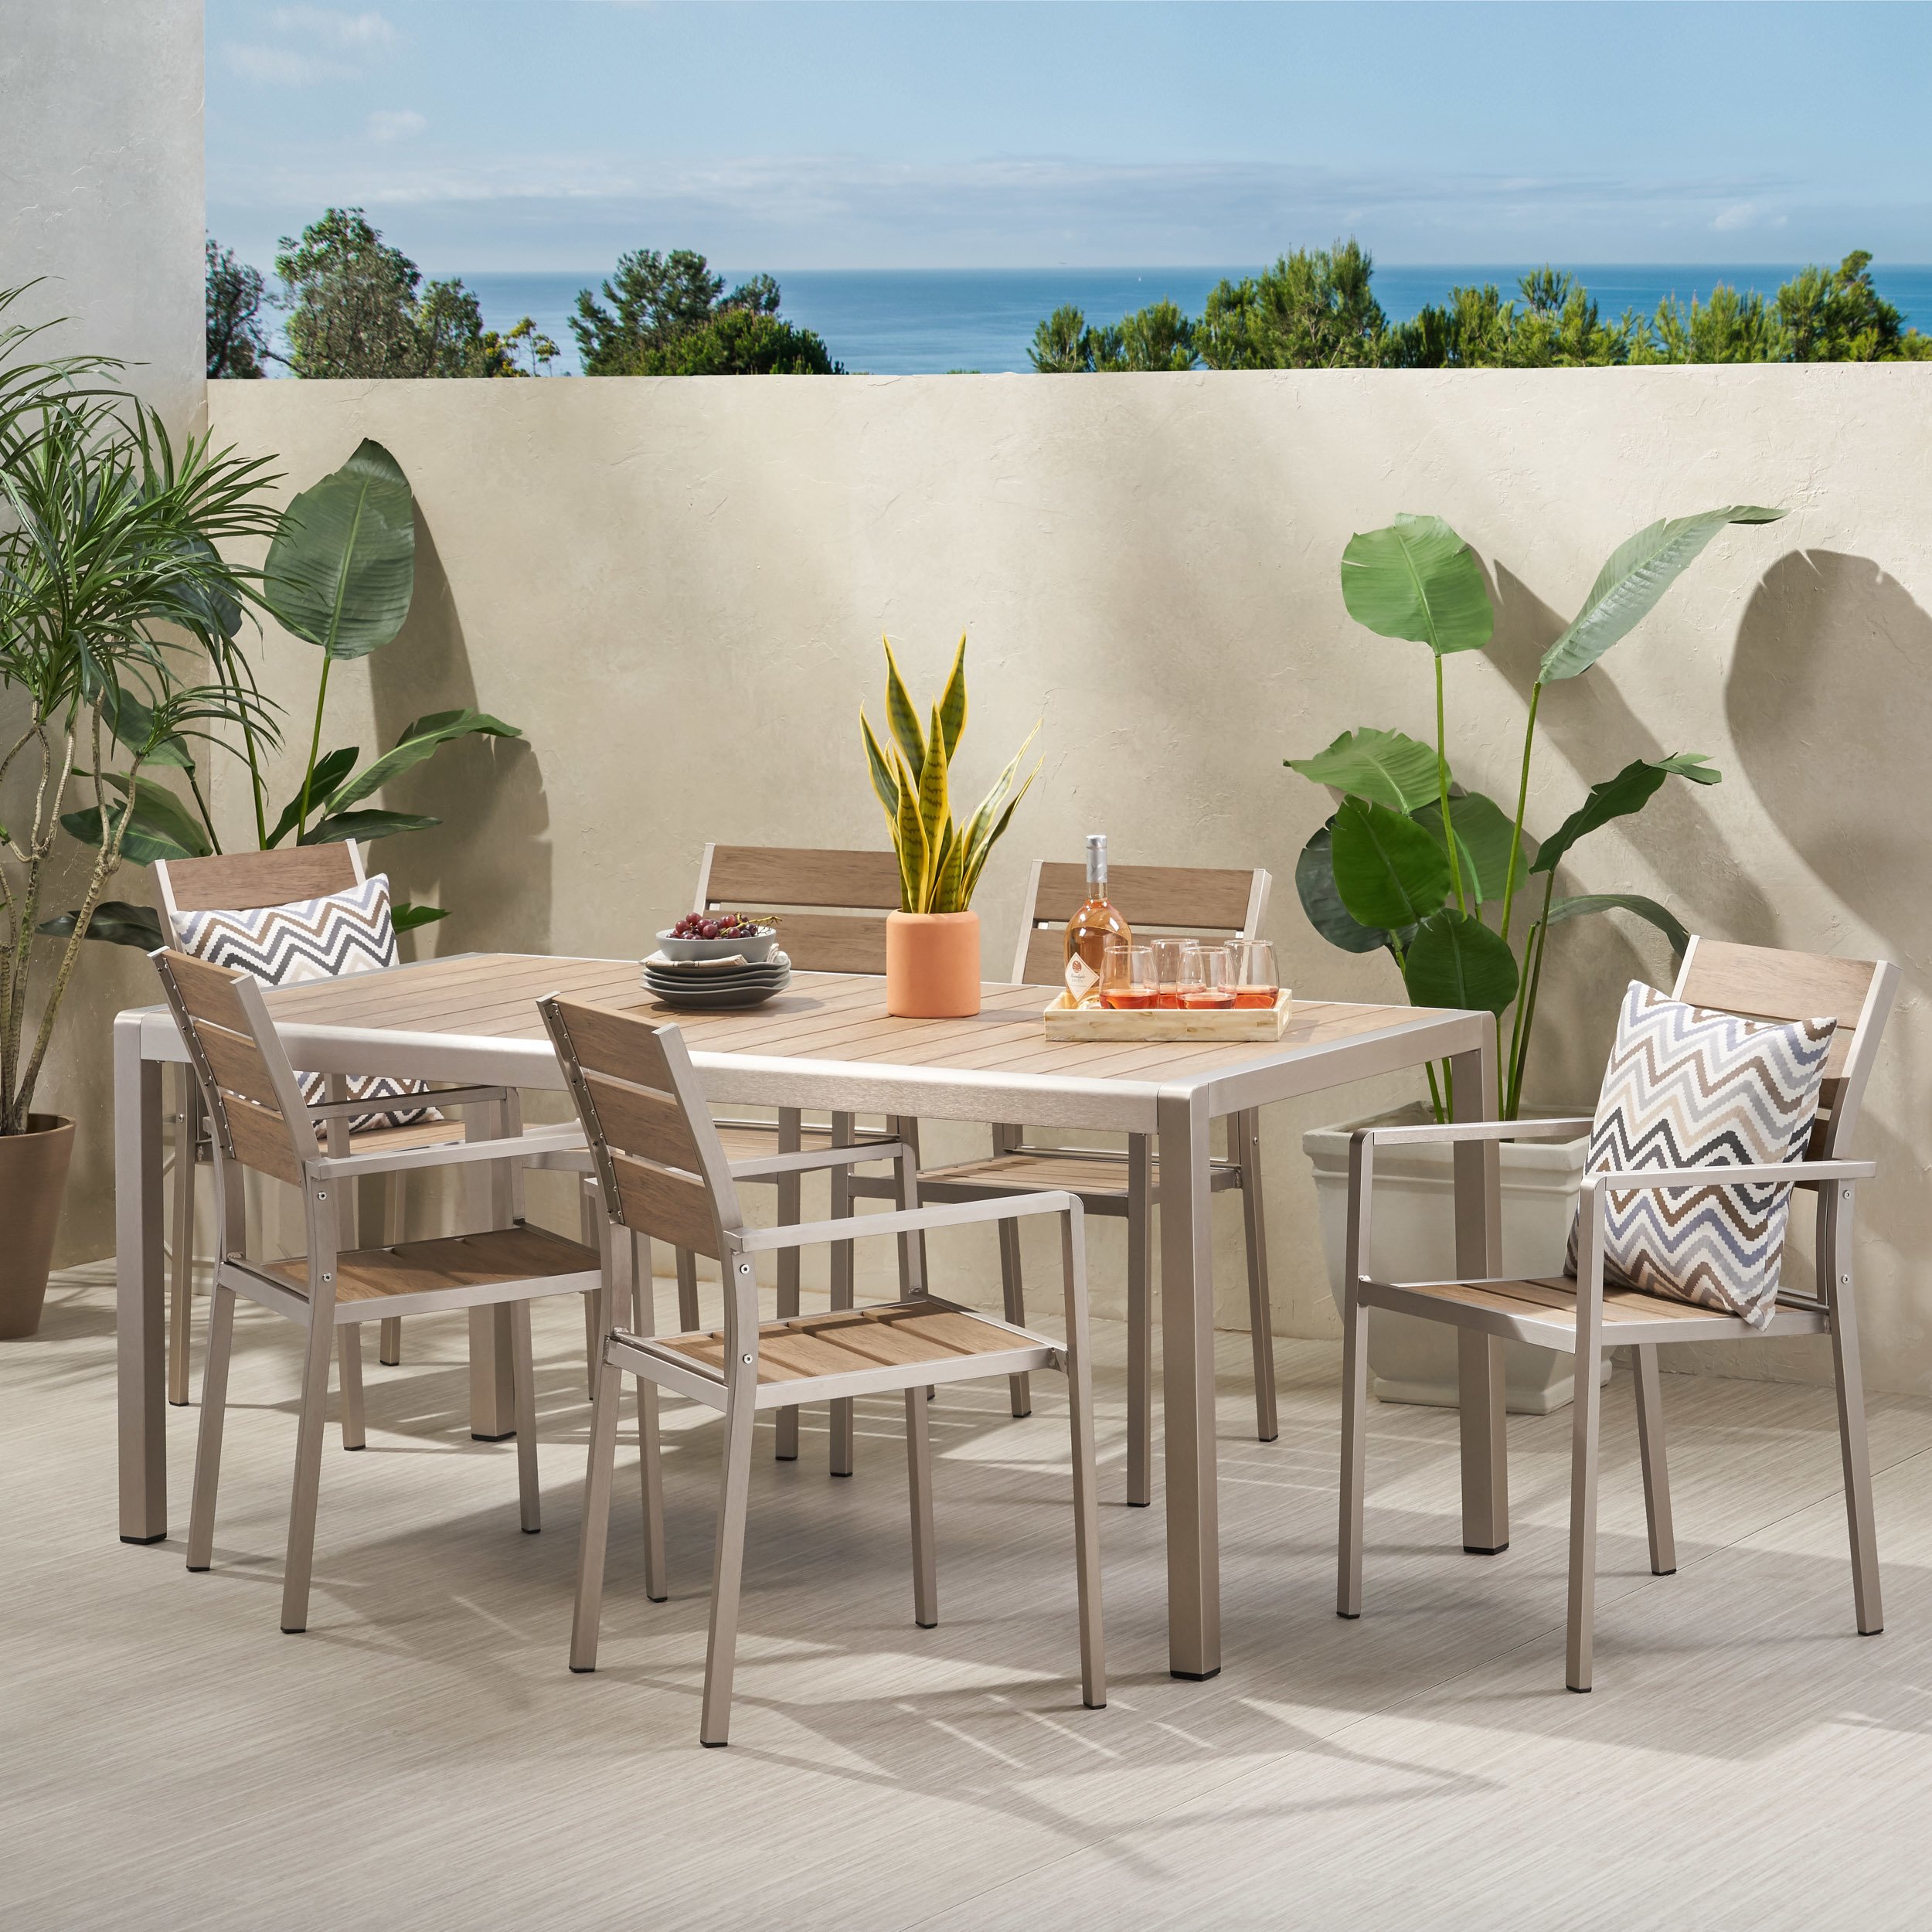 Martina Outdoor Modern Aluminum And Faux Wood 6 Seater Dining Set - Natural Finish + Silver